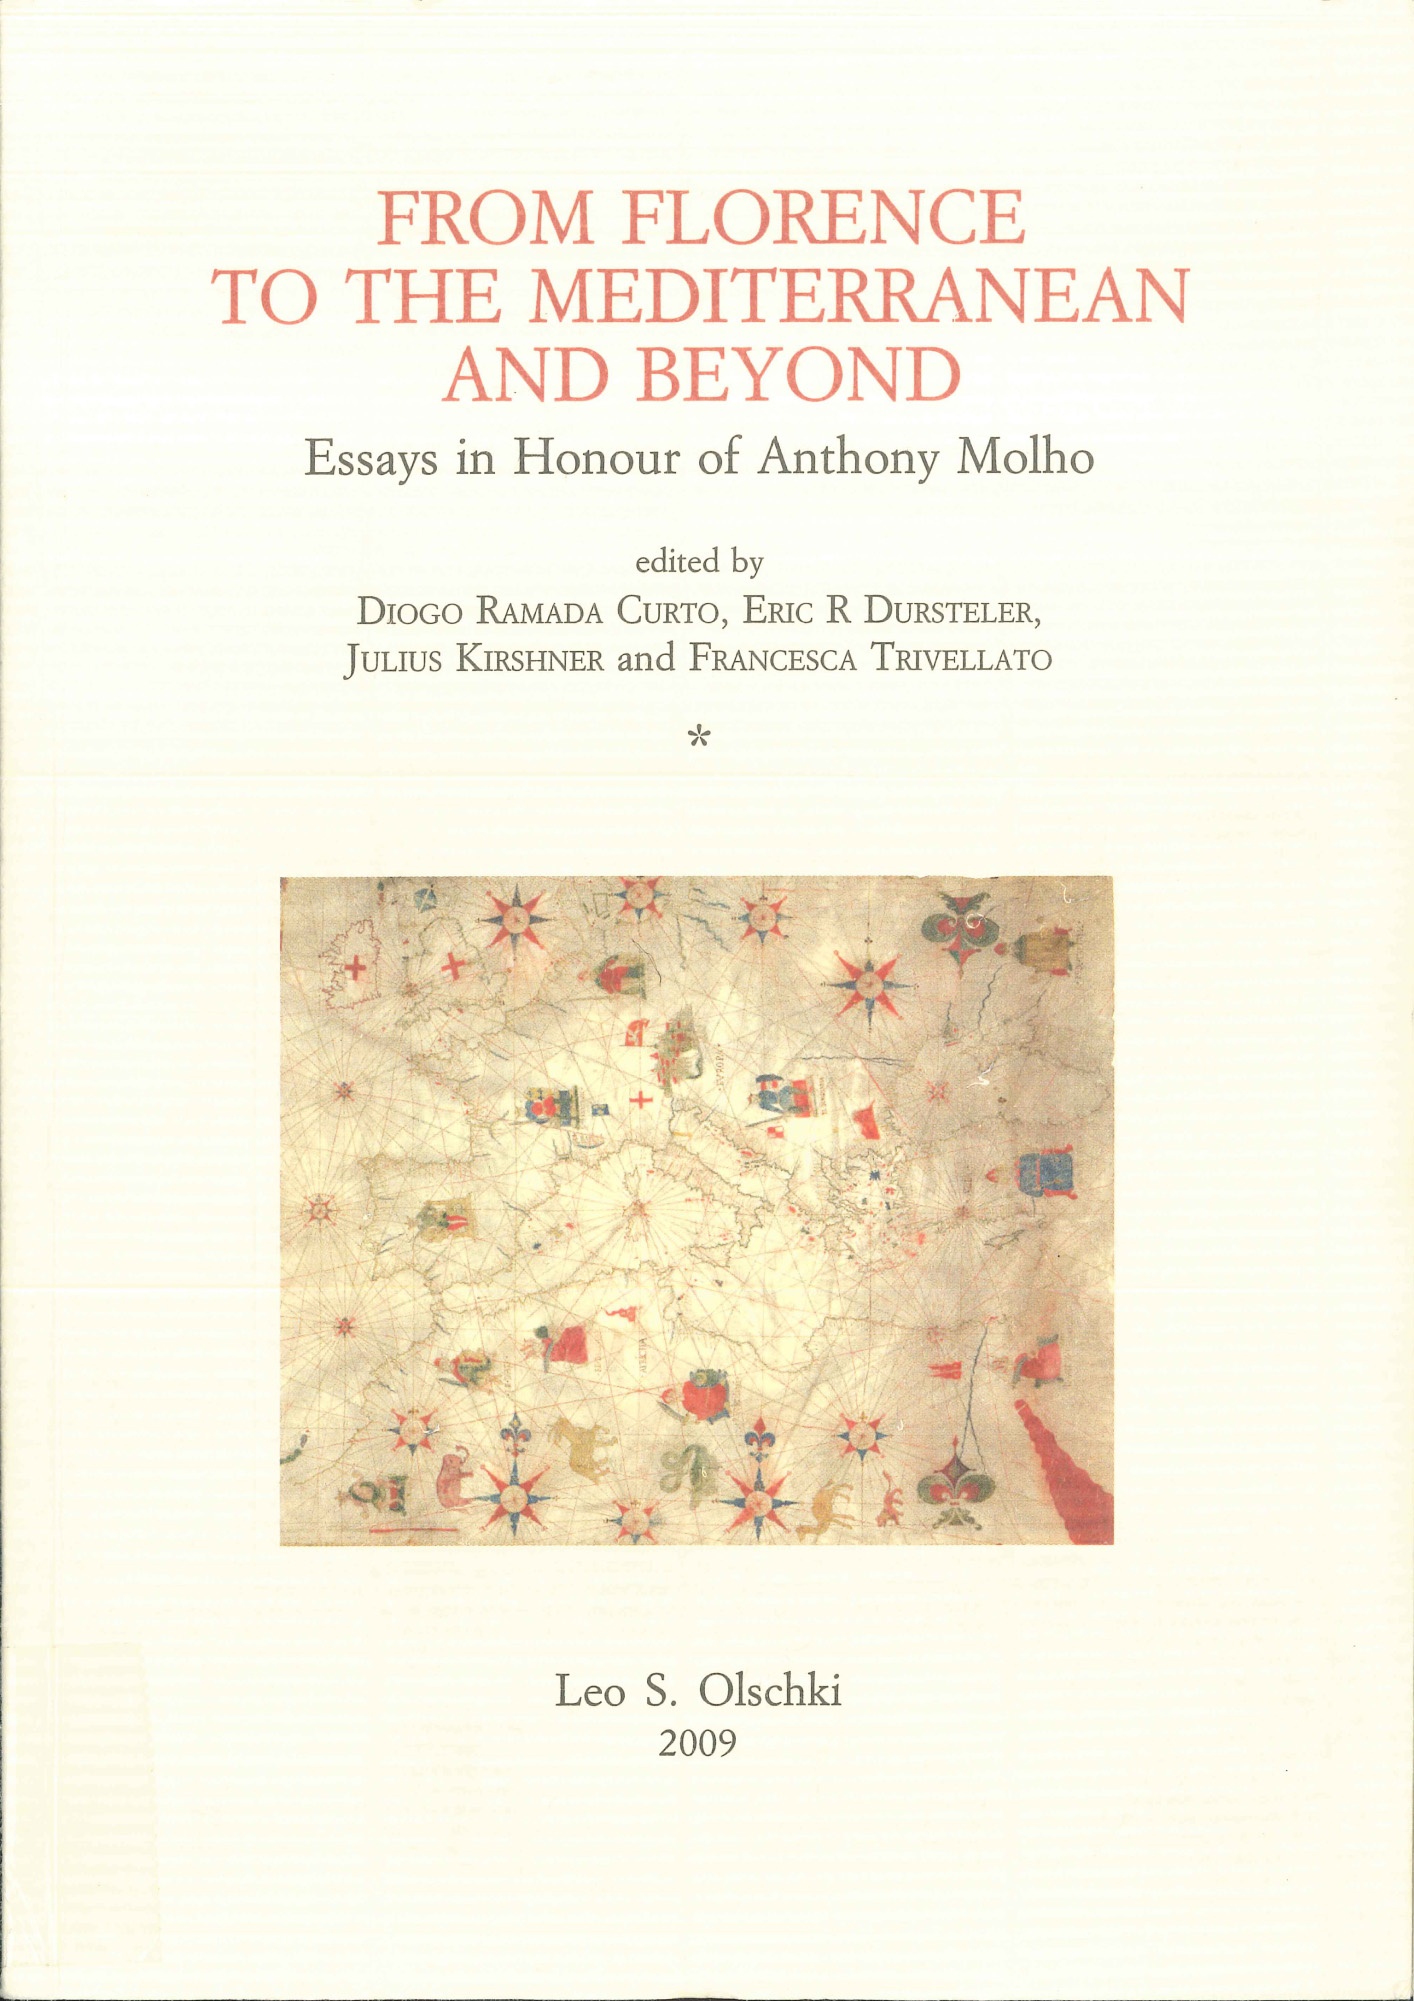 From Florence to the Mediterranean and Beyond: Essays in Honour of Anthony Mohlo